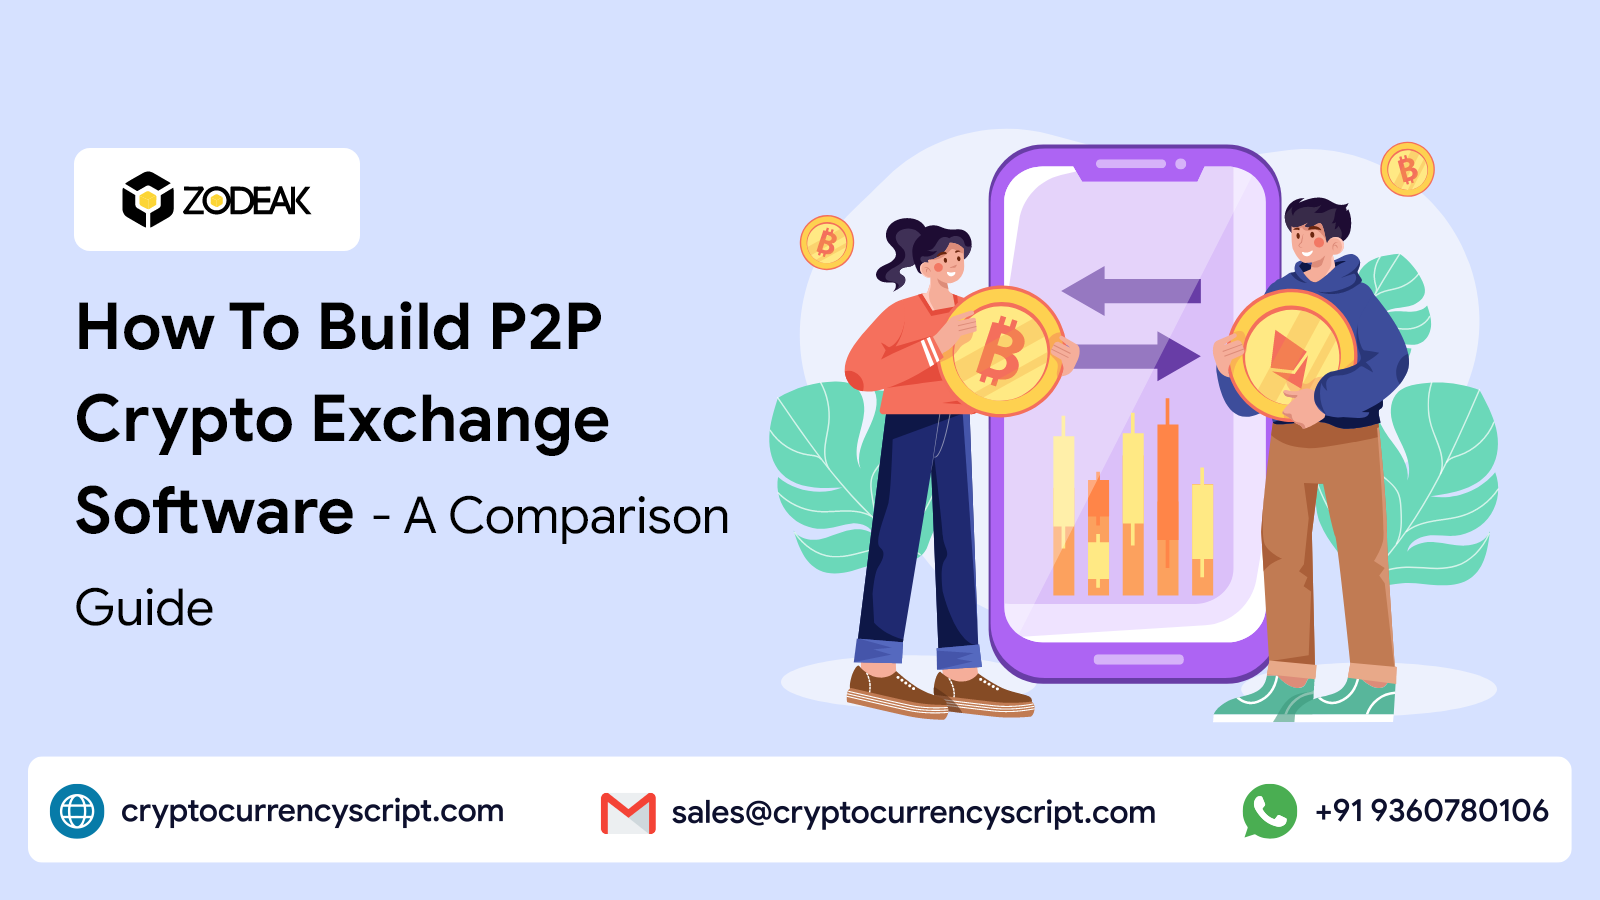 How To Build P2P Crypto Exchange Software - Quick Guide